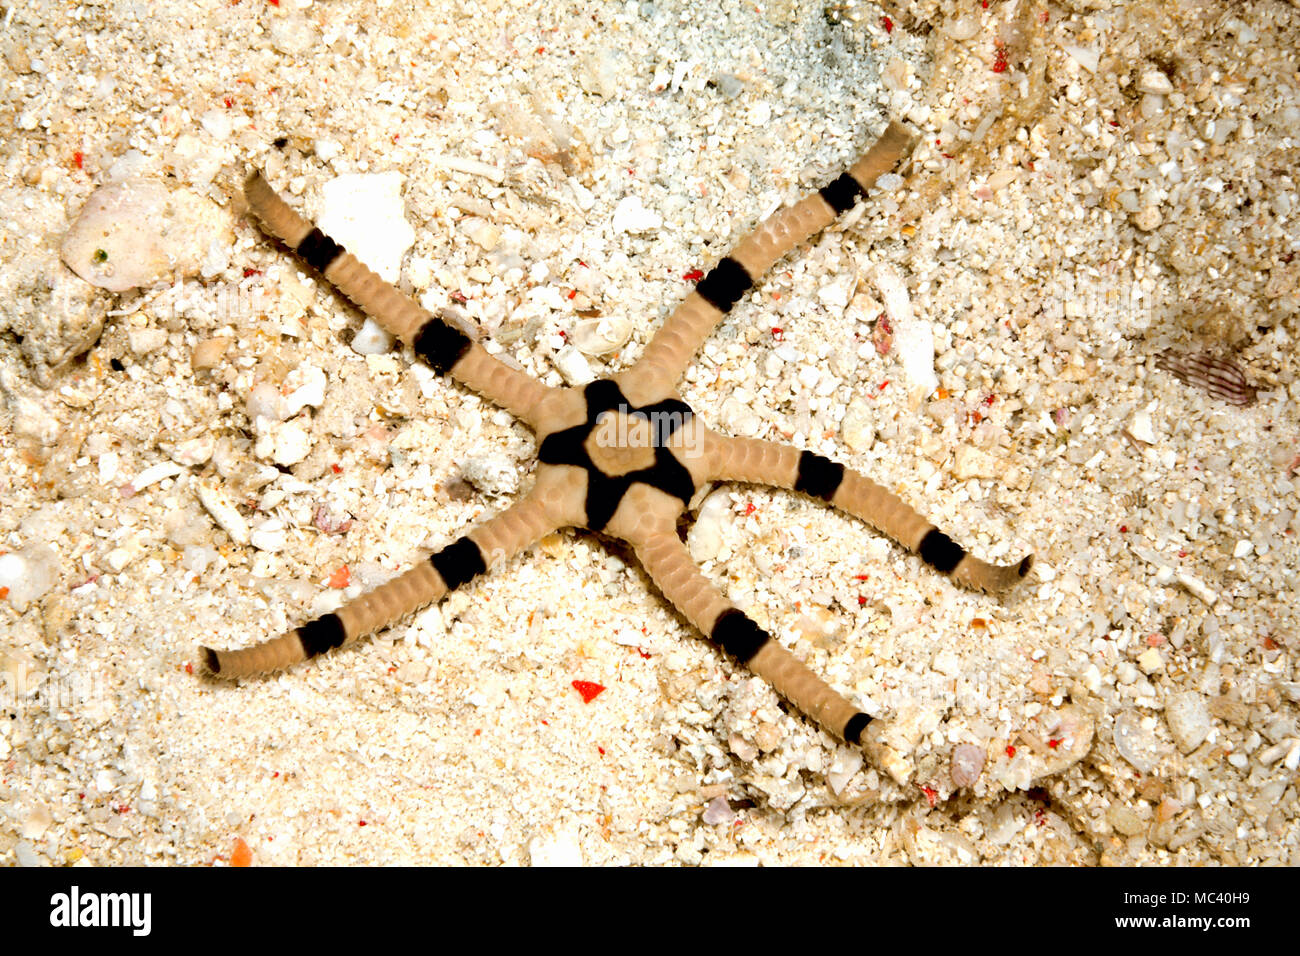 Superb Brittle Star, also known as Banded Brittle Star, Ophiolepis superba. Stock Photo